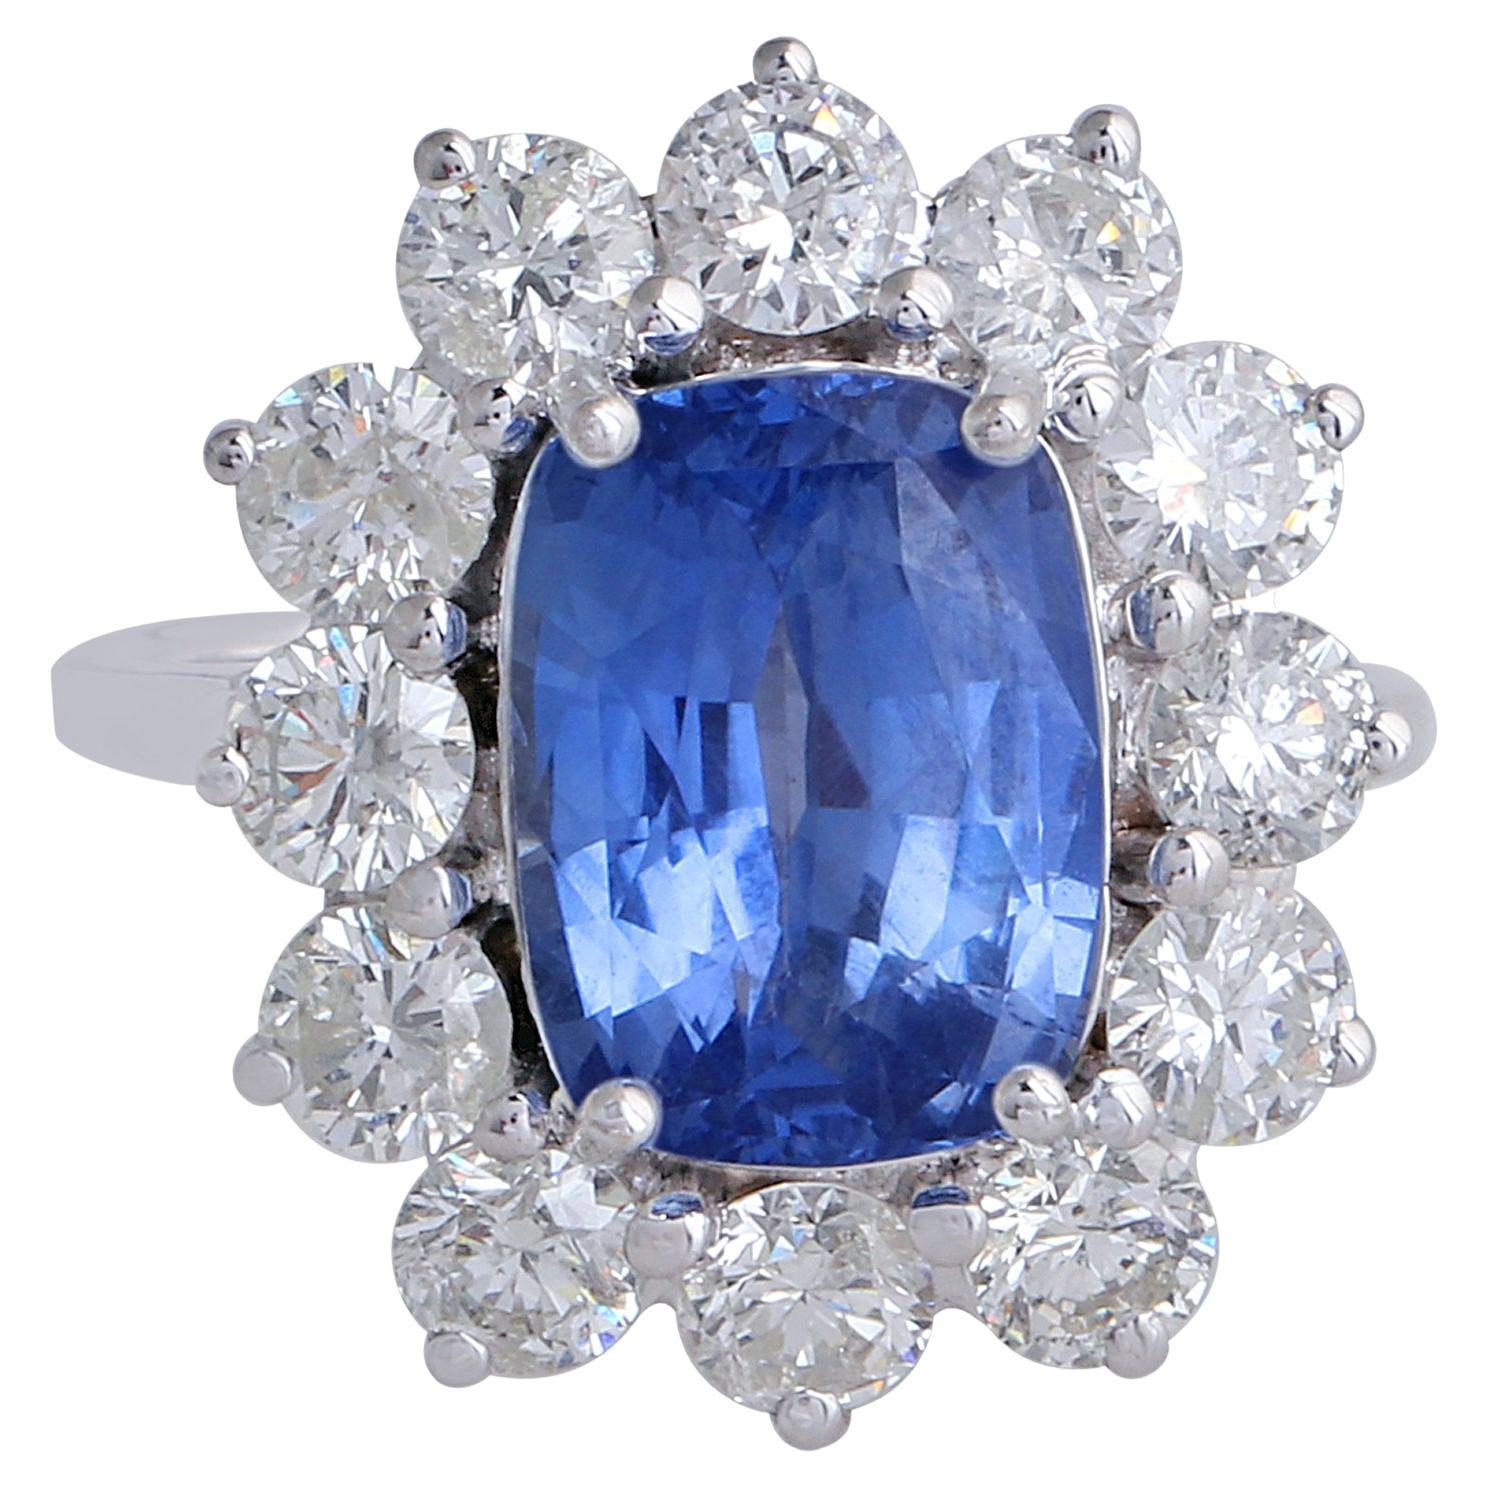 For Sale:  Blue Sapphire Gemstone Cocktail Ring Diamond 18 Kt White Gold Handmade Jewelry